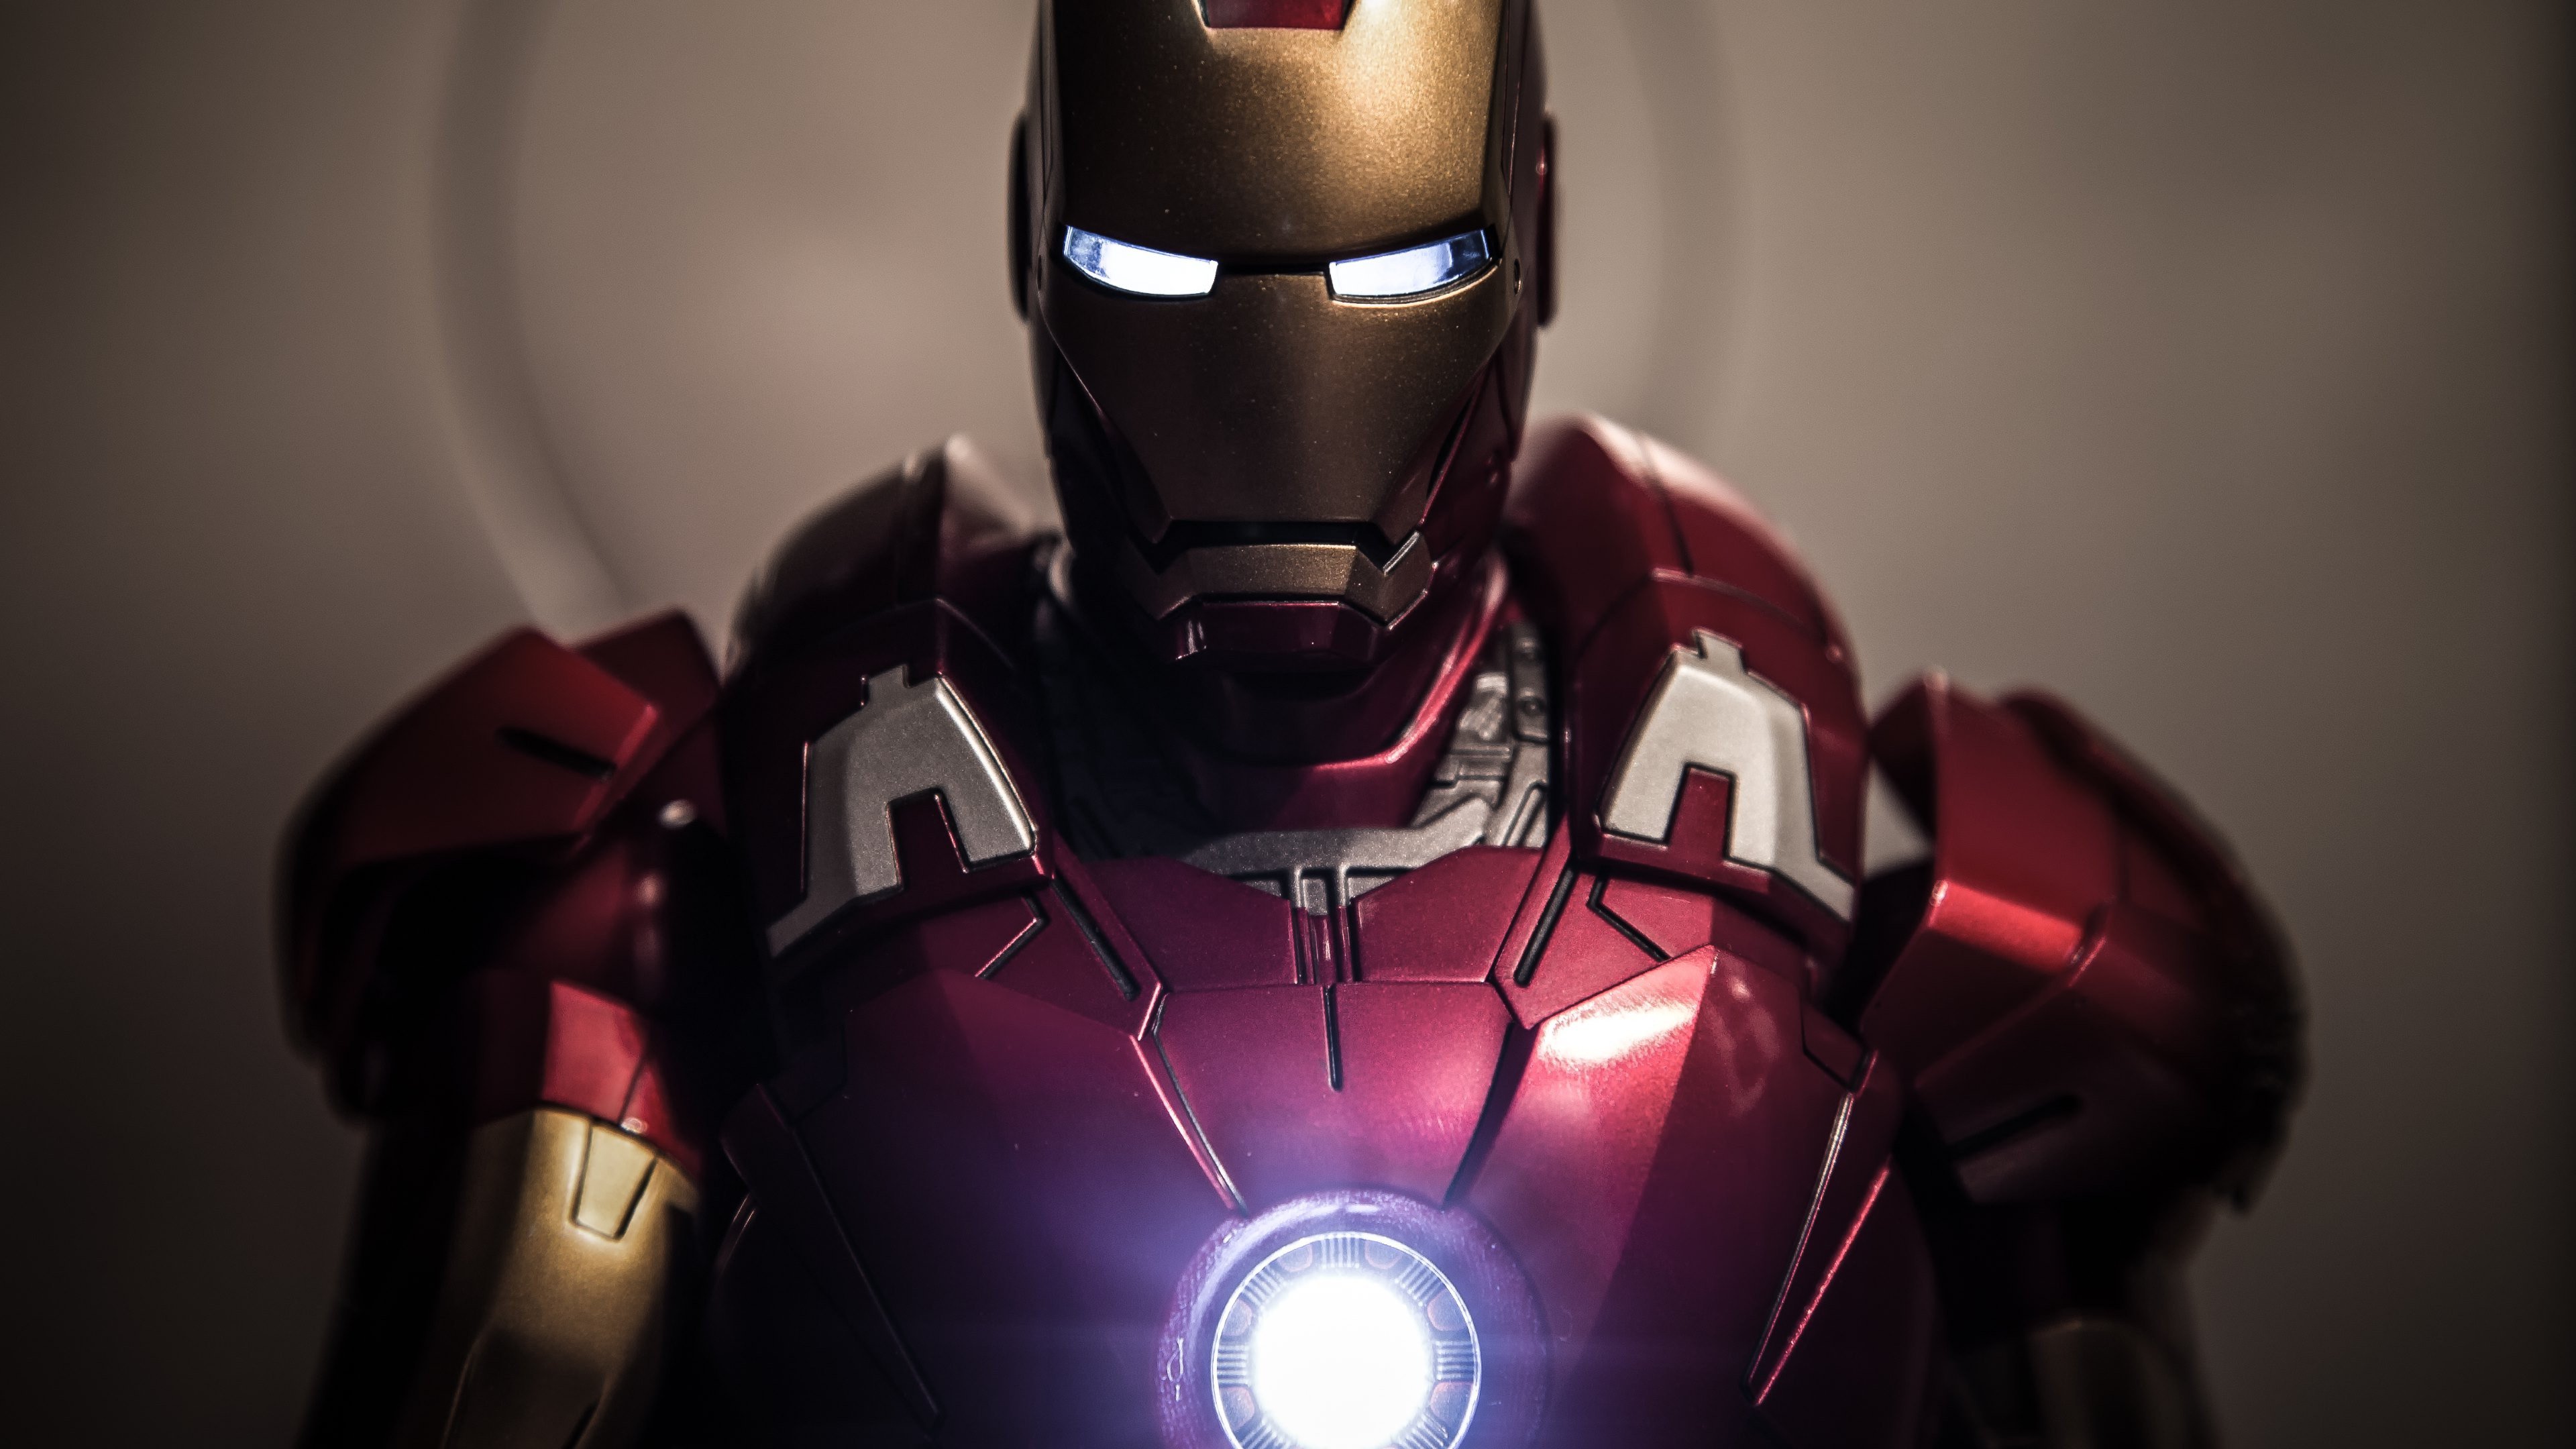 Iron Man Suit In Close Up For Wallpaper HD